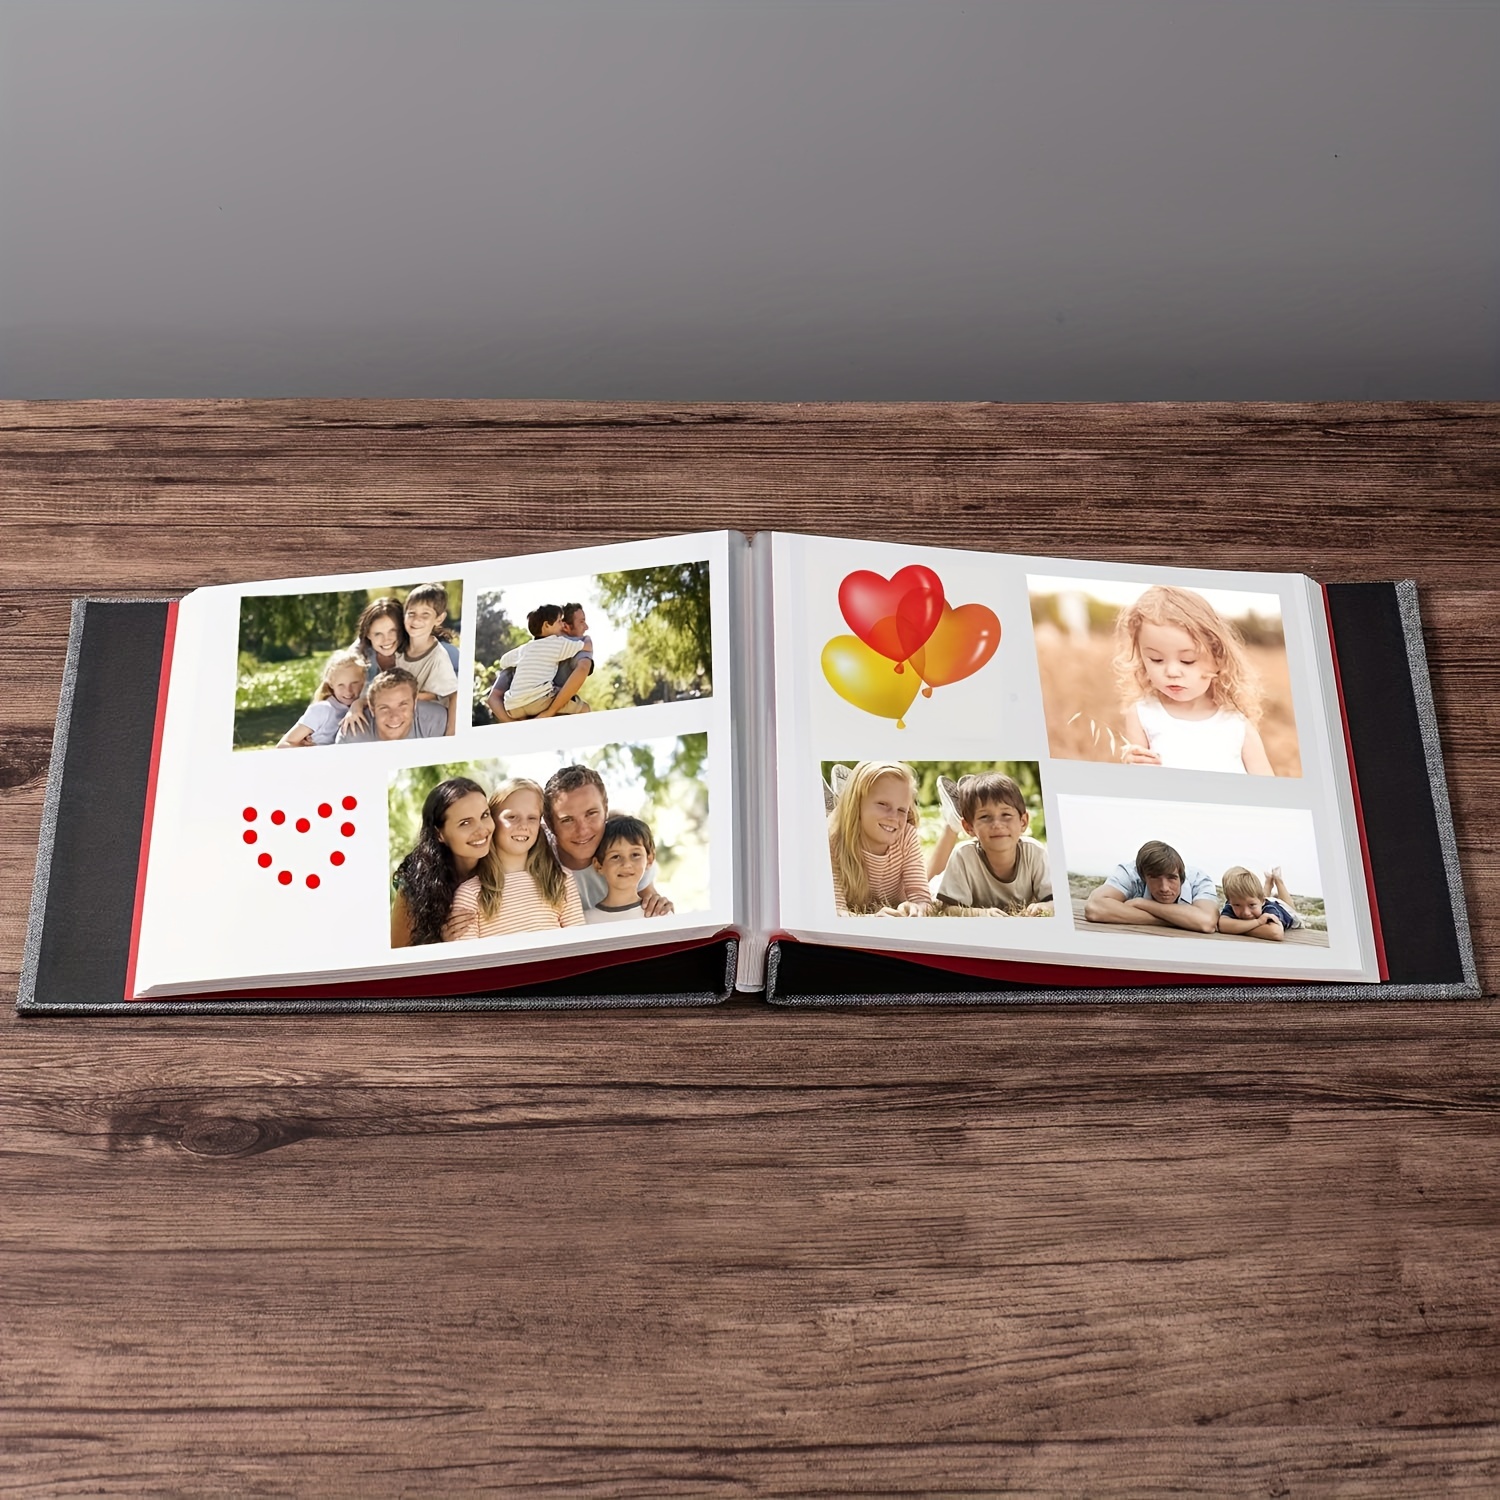 Photo Album Self Adhesive Pages, Leather Cover Albums with 60 Sticky Pages,  Scrapbook Albums for Christmas, Wedding, Birthday Baby Gifts Hold 3X5